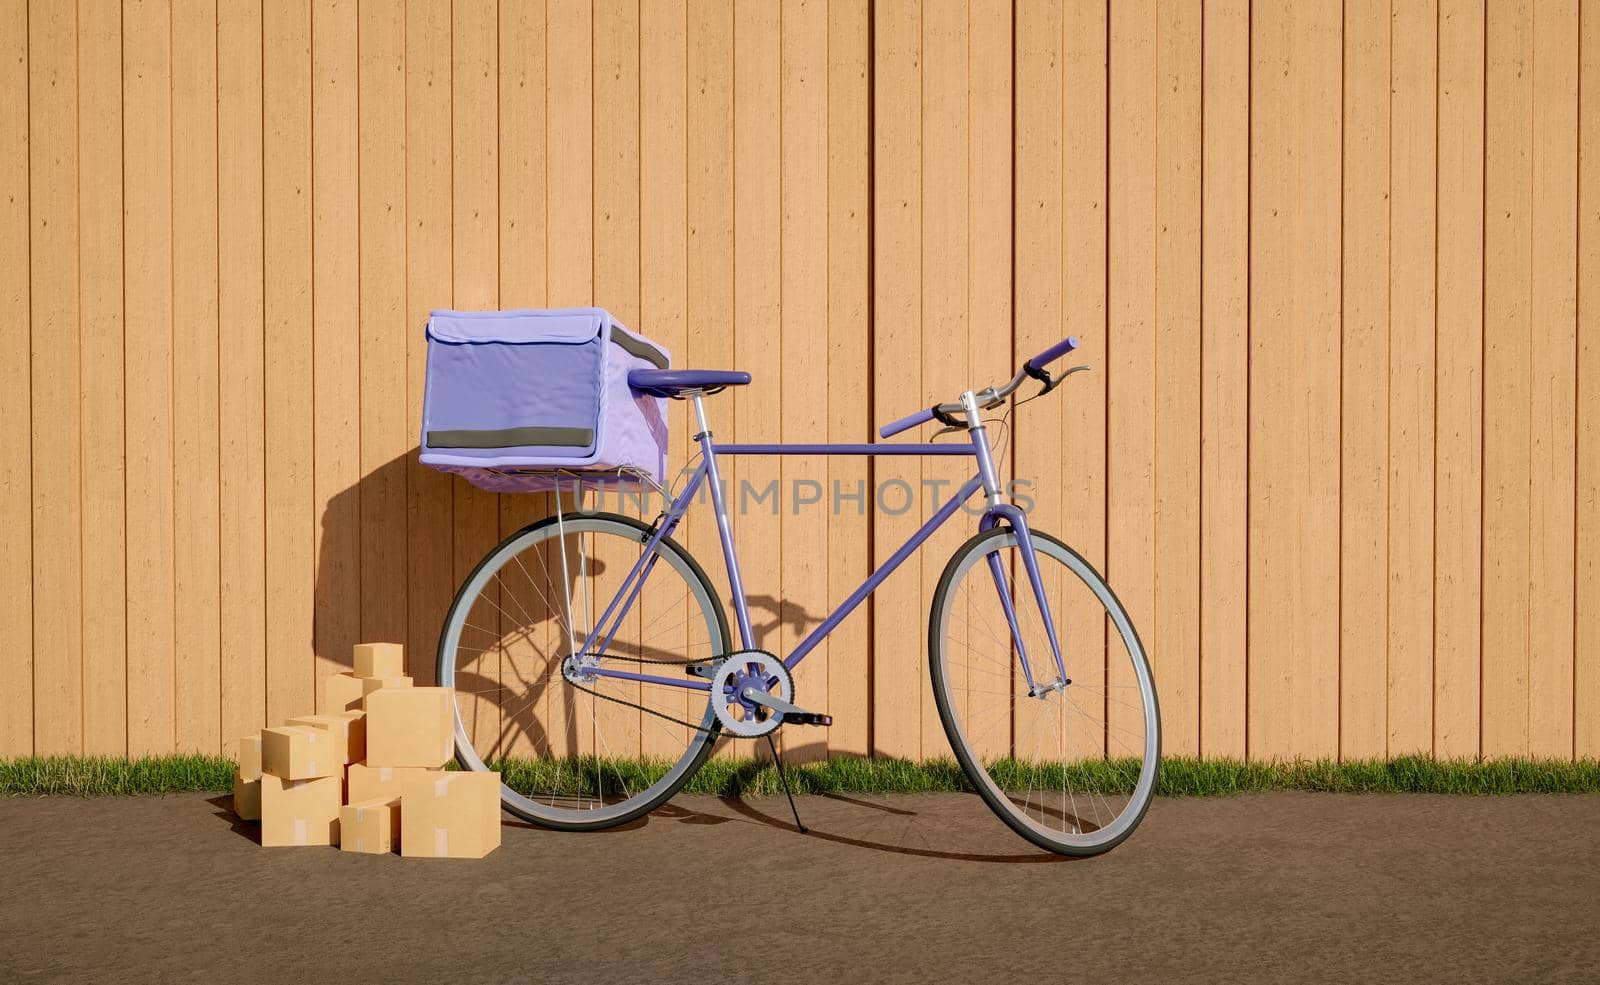 delivery bike parked on the street with delivery packages by asolano